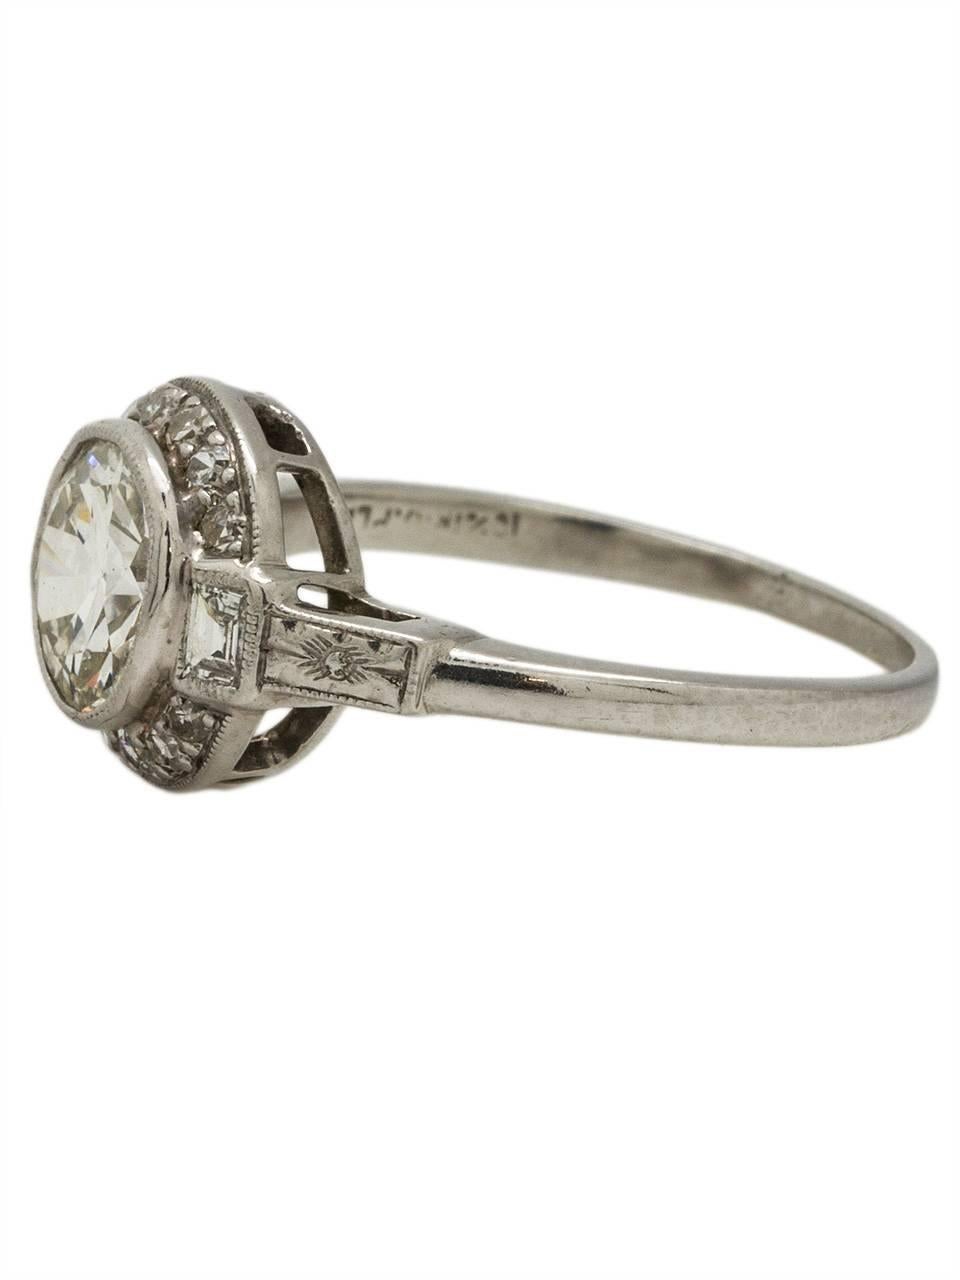 This gorgeous vintage Art Deco platinum engagement ring showcases a stunning EGL certified 1.12ct Old European Cut center diamond, H/VS1. The bezel set center stone is accented by 12 single cut and two baguette side diamonds, which add an additional